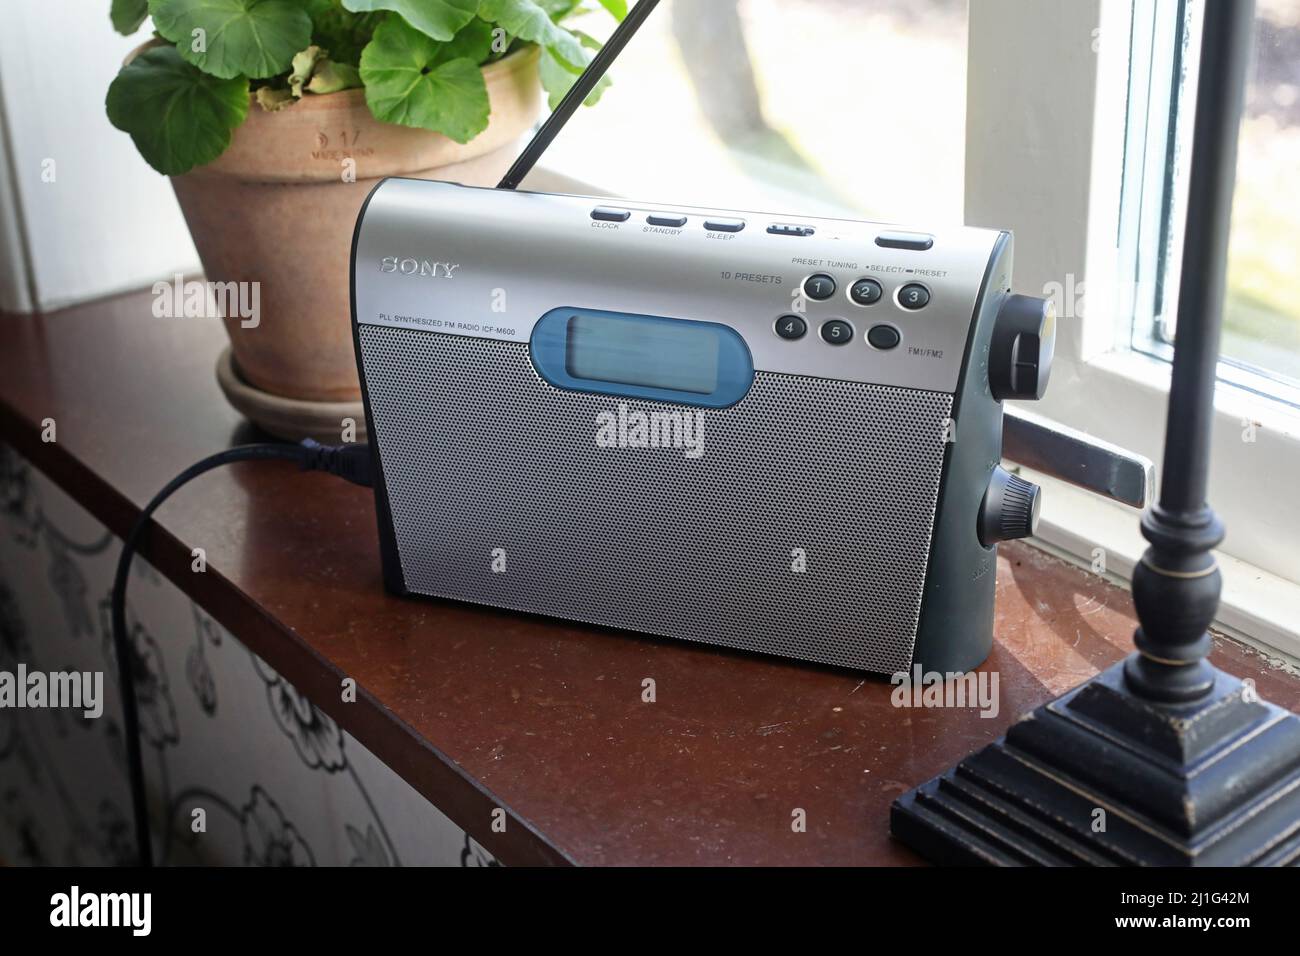 Page 3 - Fm Radio High Resolution Stock Photography and Images - Alamy